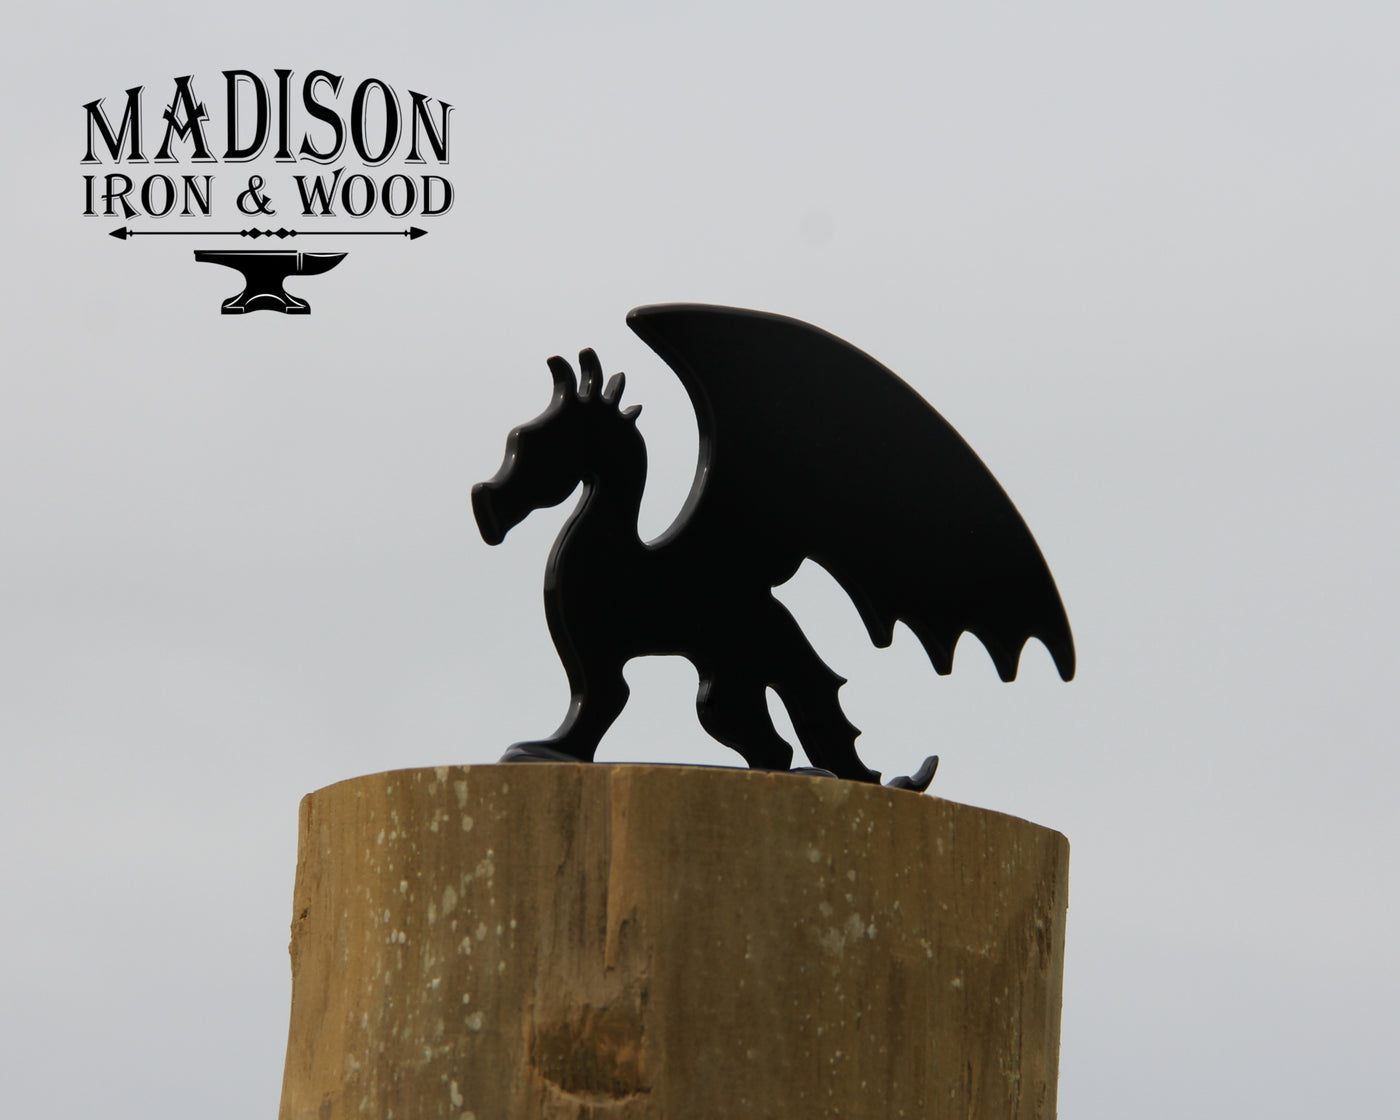 Dragon Post Top For Round Wood Fence Post - Madison Iron and Wood - Post Cap - metal outdoor decor - Steel deocrations - american made products - veteran owned business products - fencing decorations - fencing supplies - custom wall decorations - personalized wall signs - steel - decorative post caps - steel post caps - metal post caps - brackets - structural brackets - home improvement - easter - easter decorations - easter gift - easter yard decor